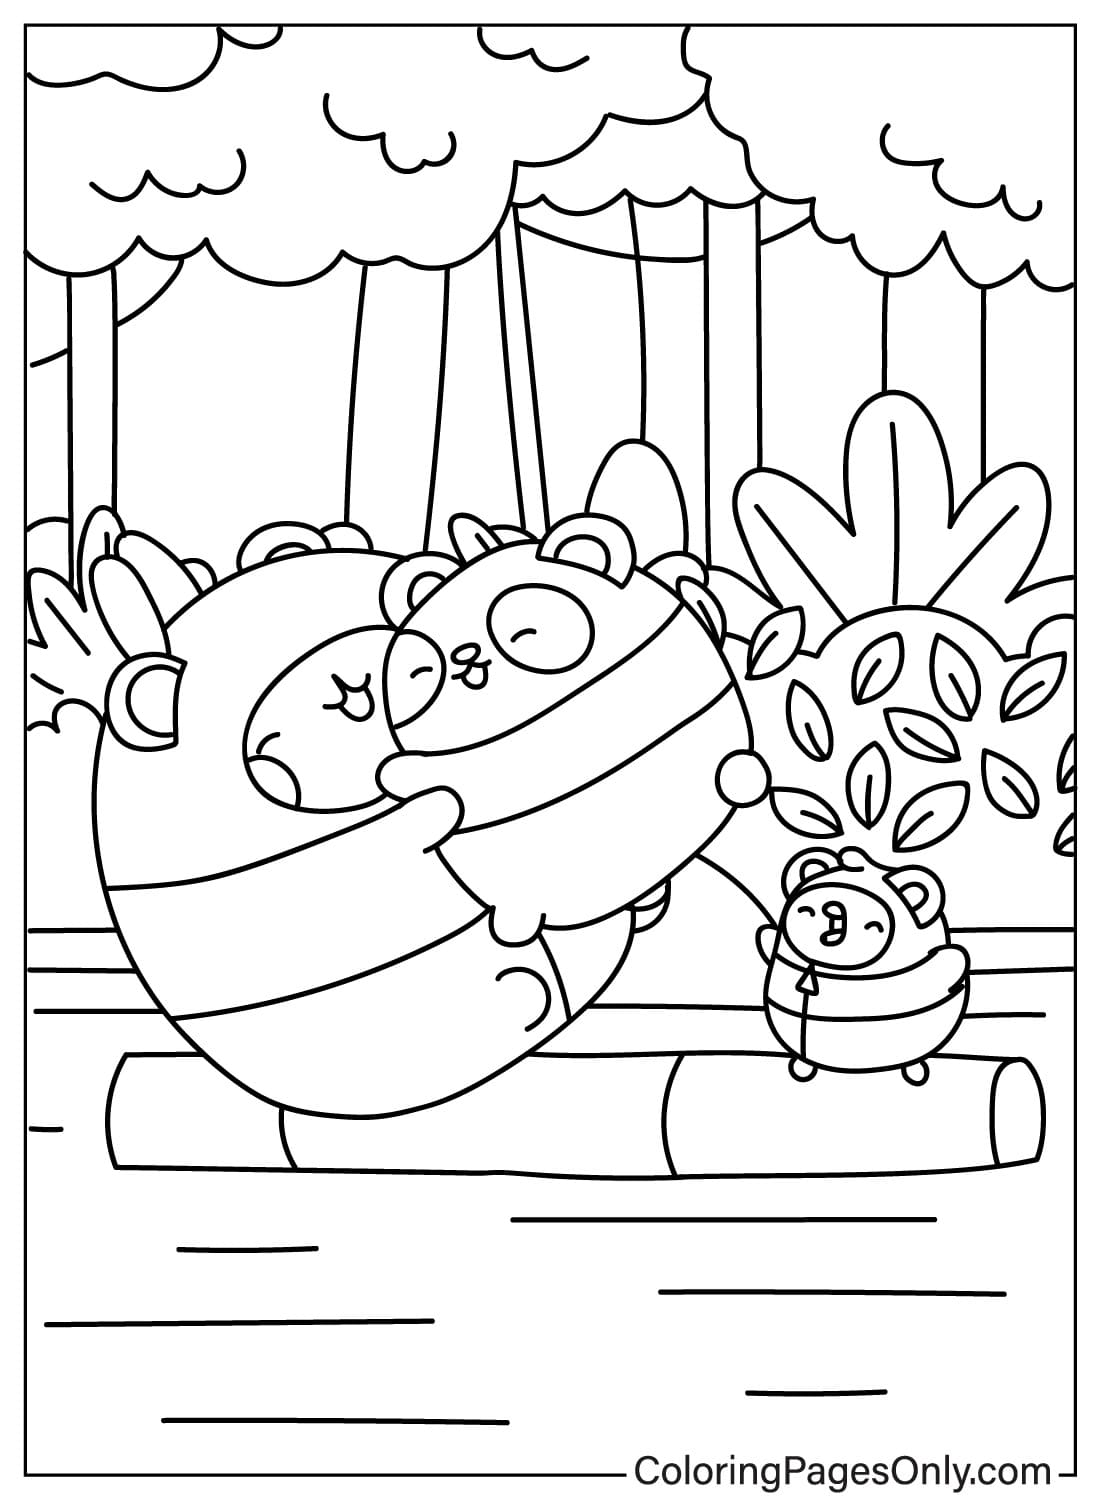 Molang and Piu Piu Coloring Page for Kids from Molang